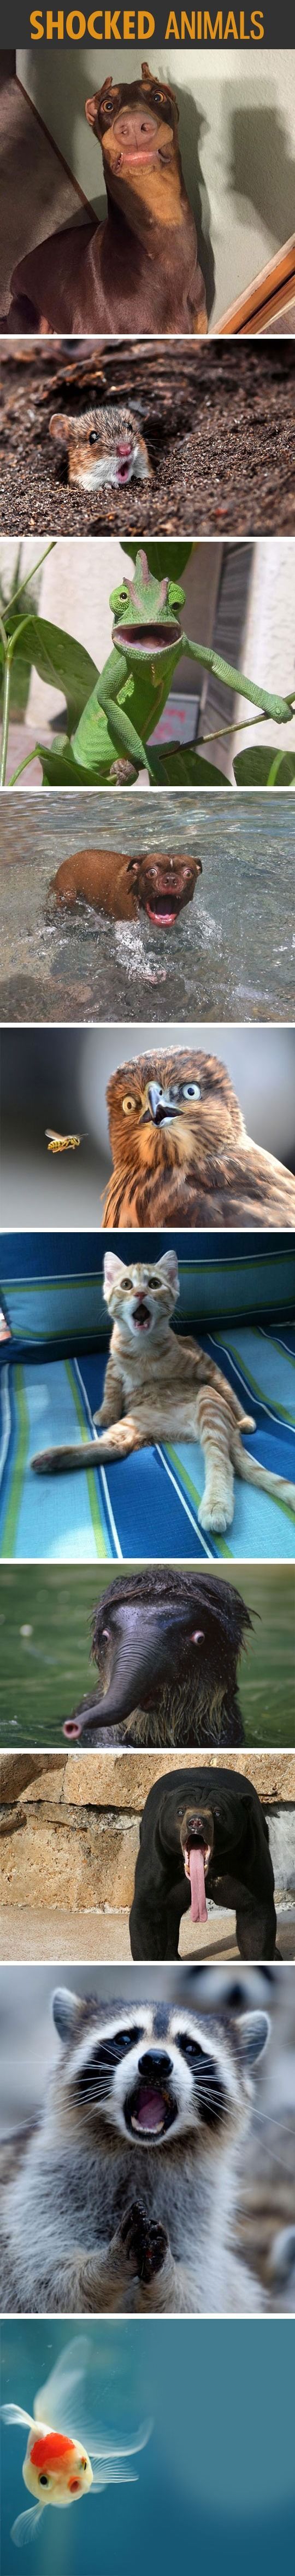 10 animals that look like someone or something just scared the crap out of them.